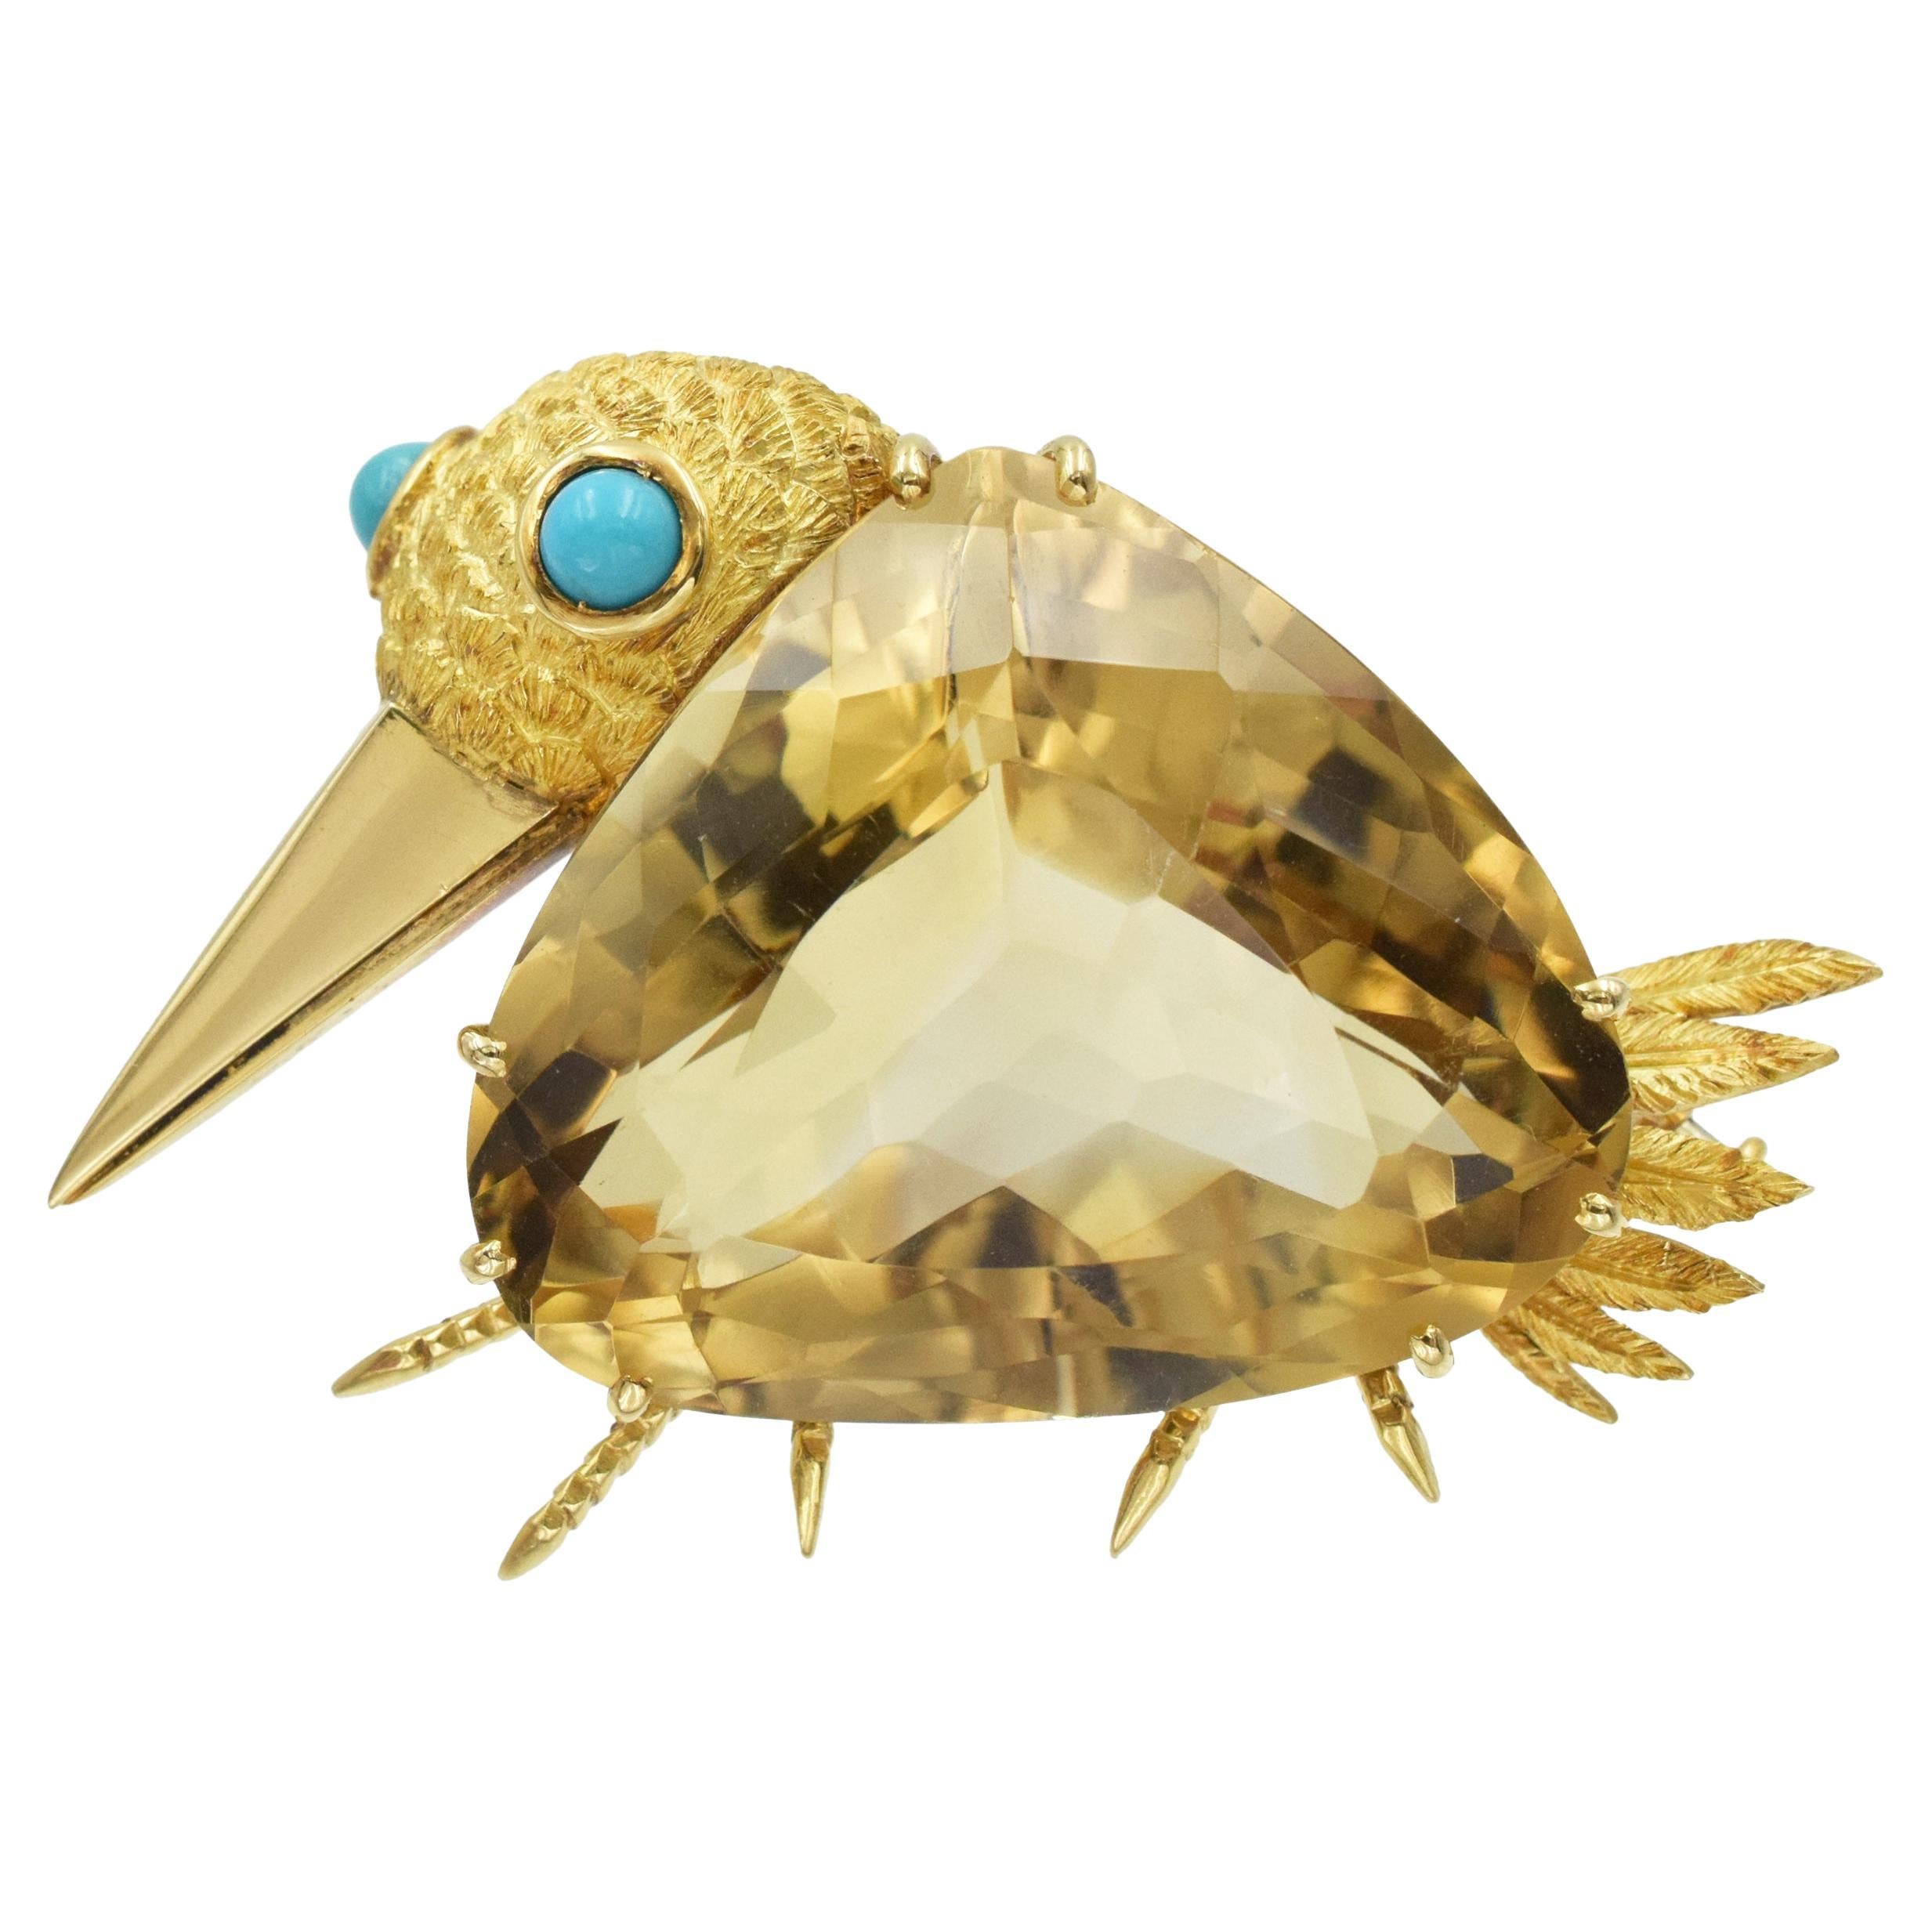 Cartier Citrine whimsical Bird Brooch in 18k Yellow Gold.